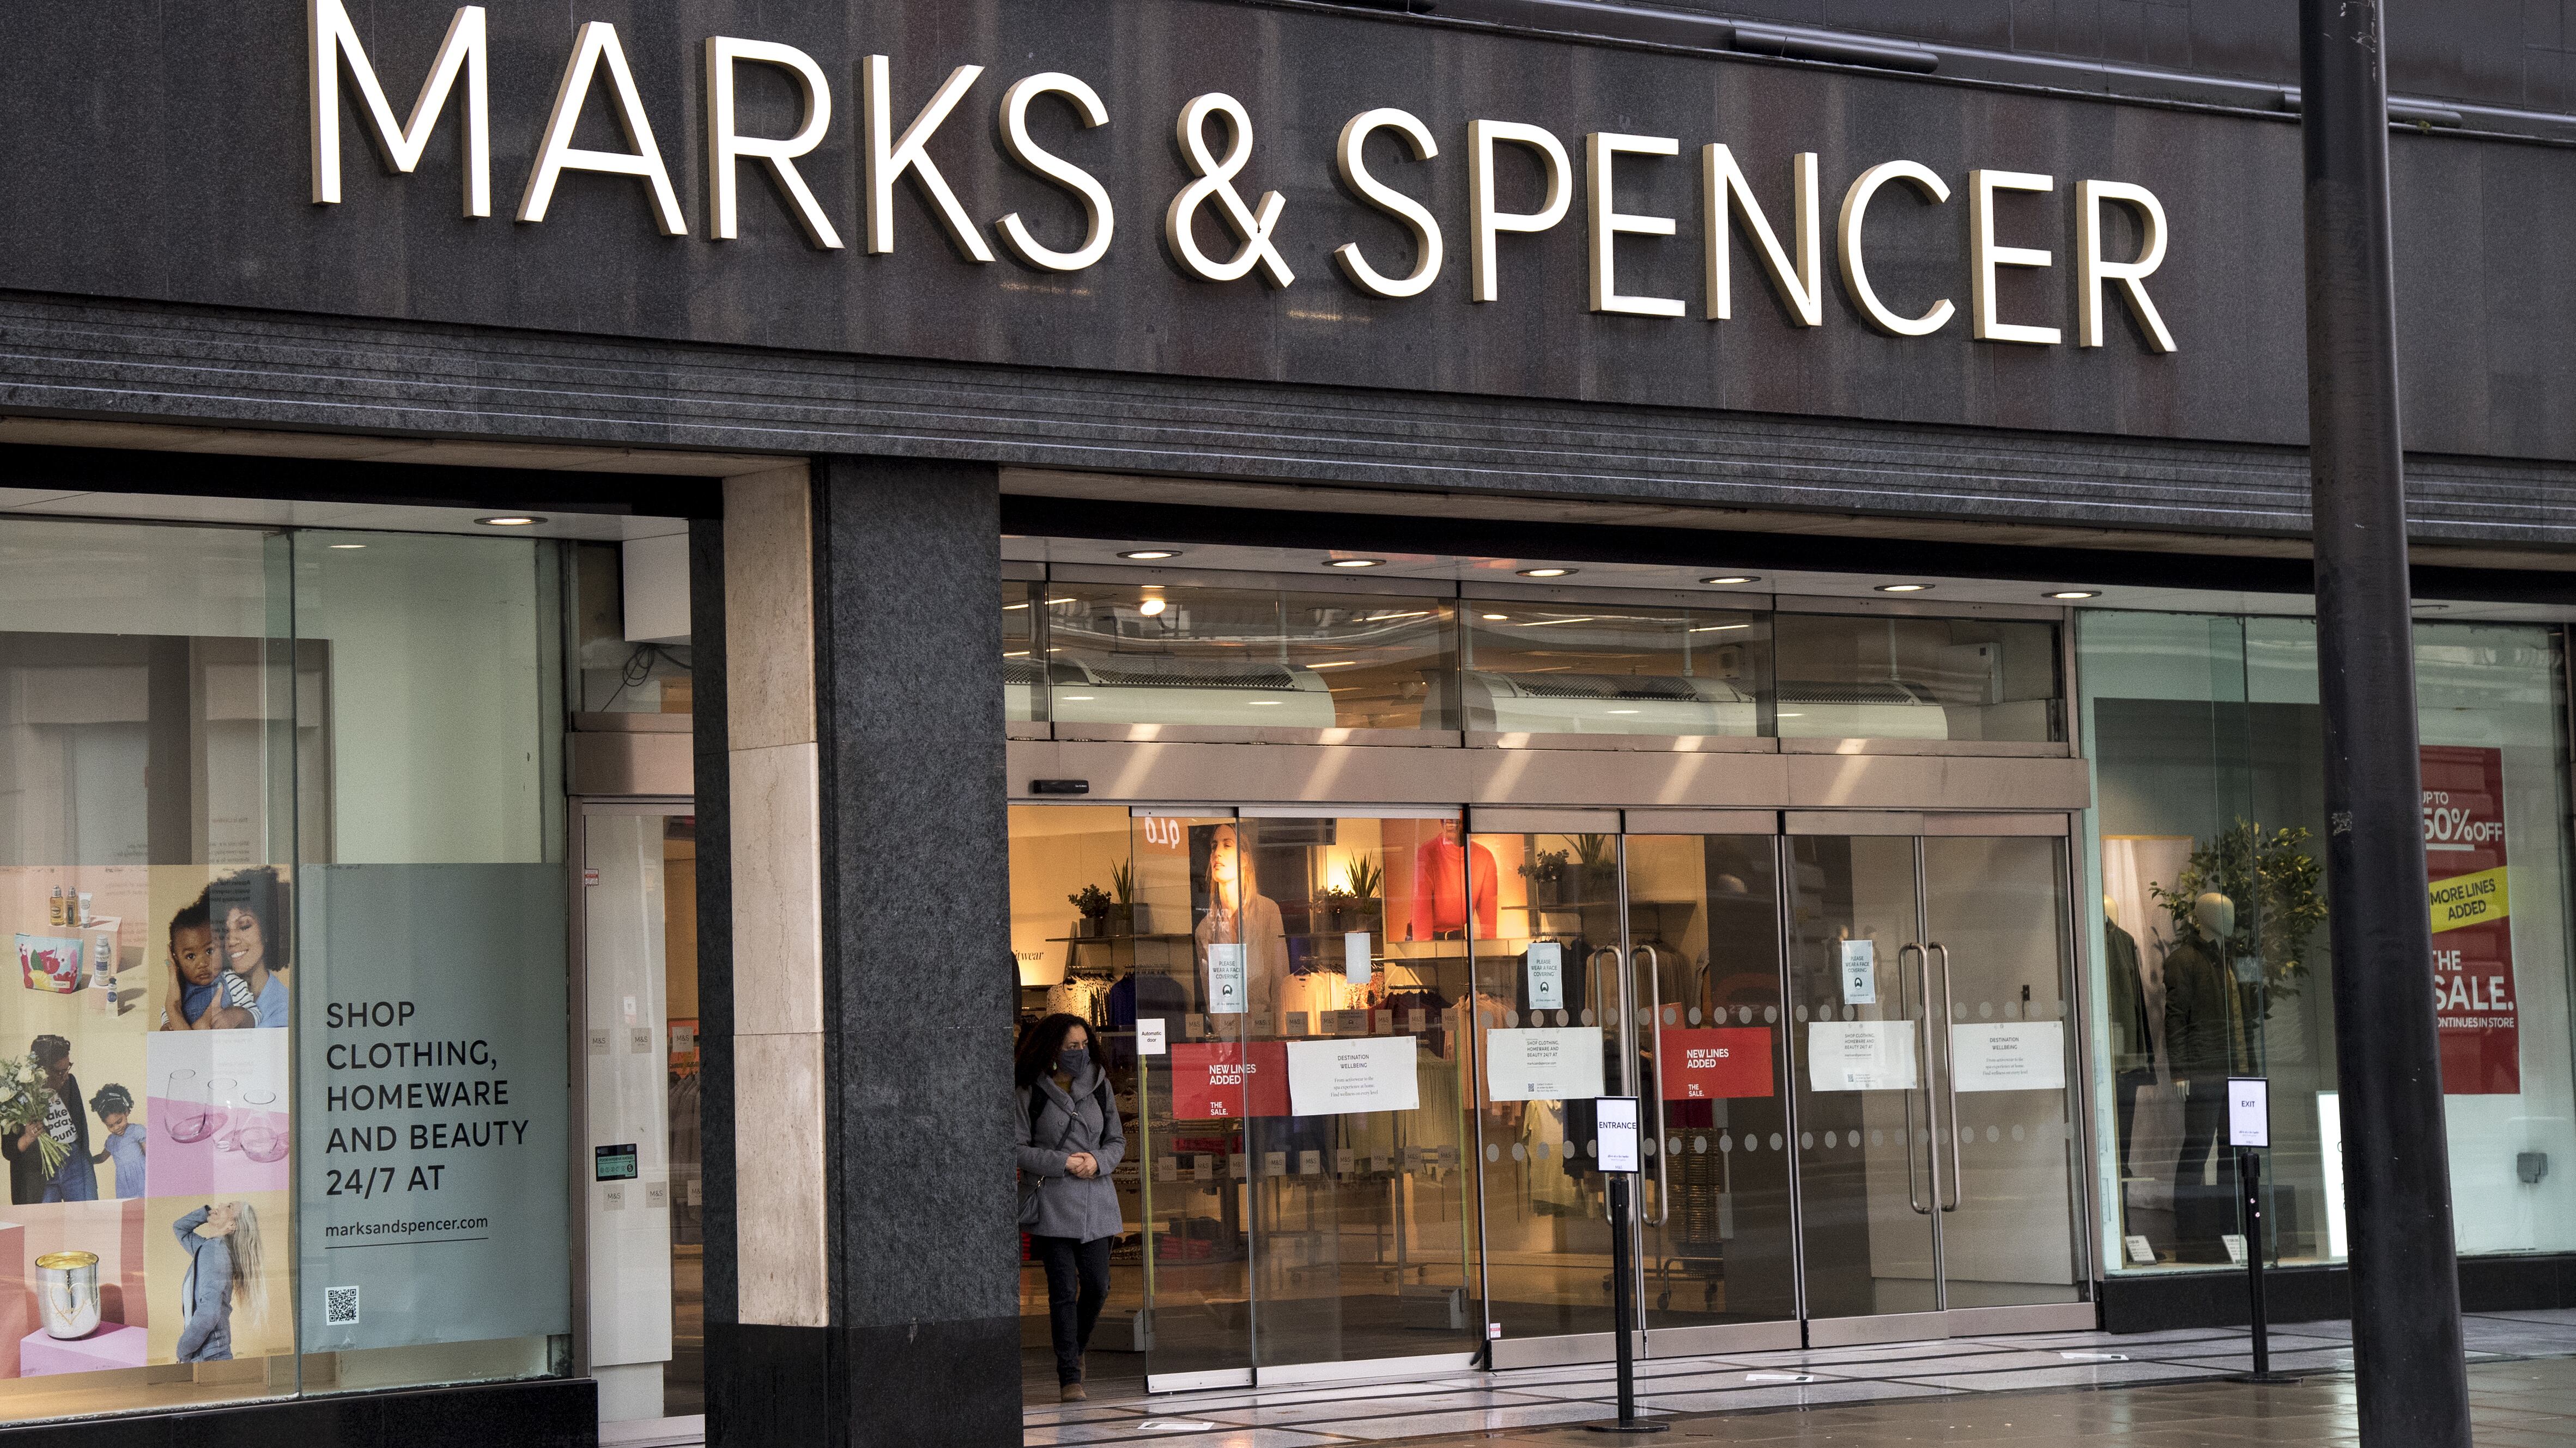 Marks & Spencer has declared the group is in its strongest financial health for nearly 30 years as a turnaround pays off with a 58% surge in profits and buoyant sales across its food halls and clothing arm